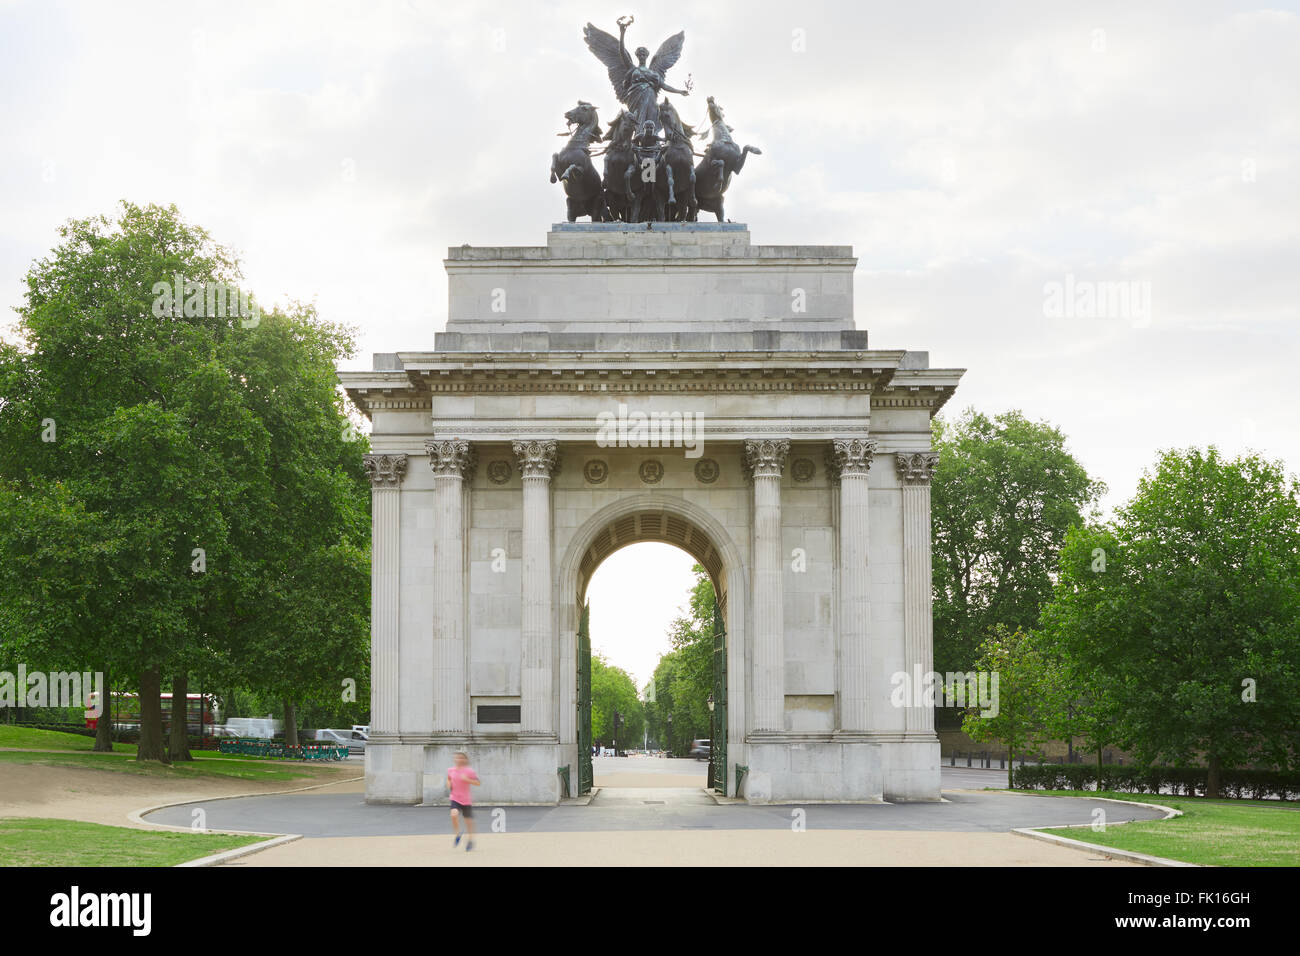 Wellington Arch or Constitution Arch is a triumphal arch located to the south of Hyde Park in London, man jogging in the morning Stock Photo